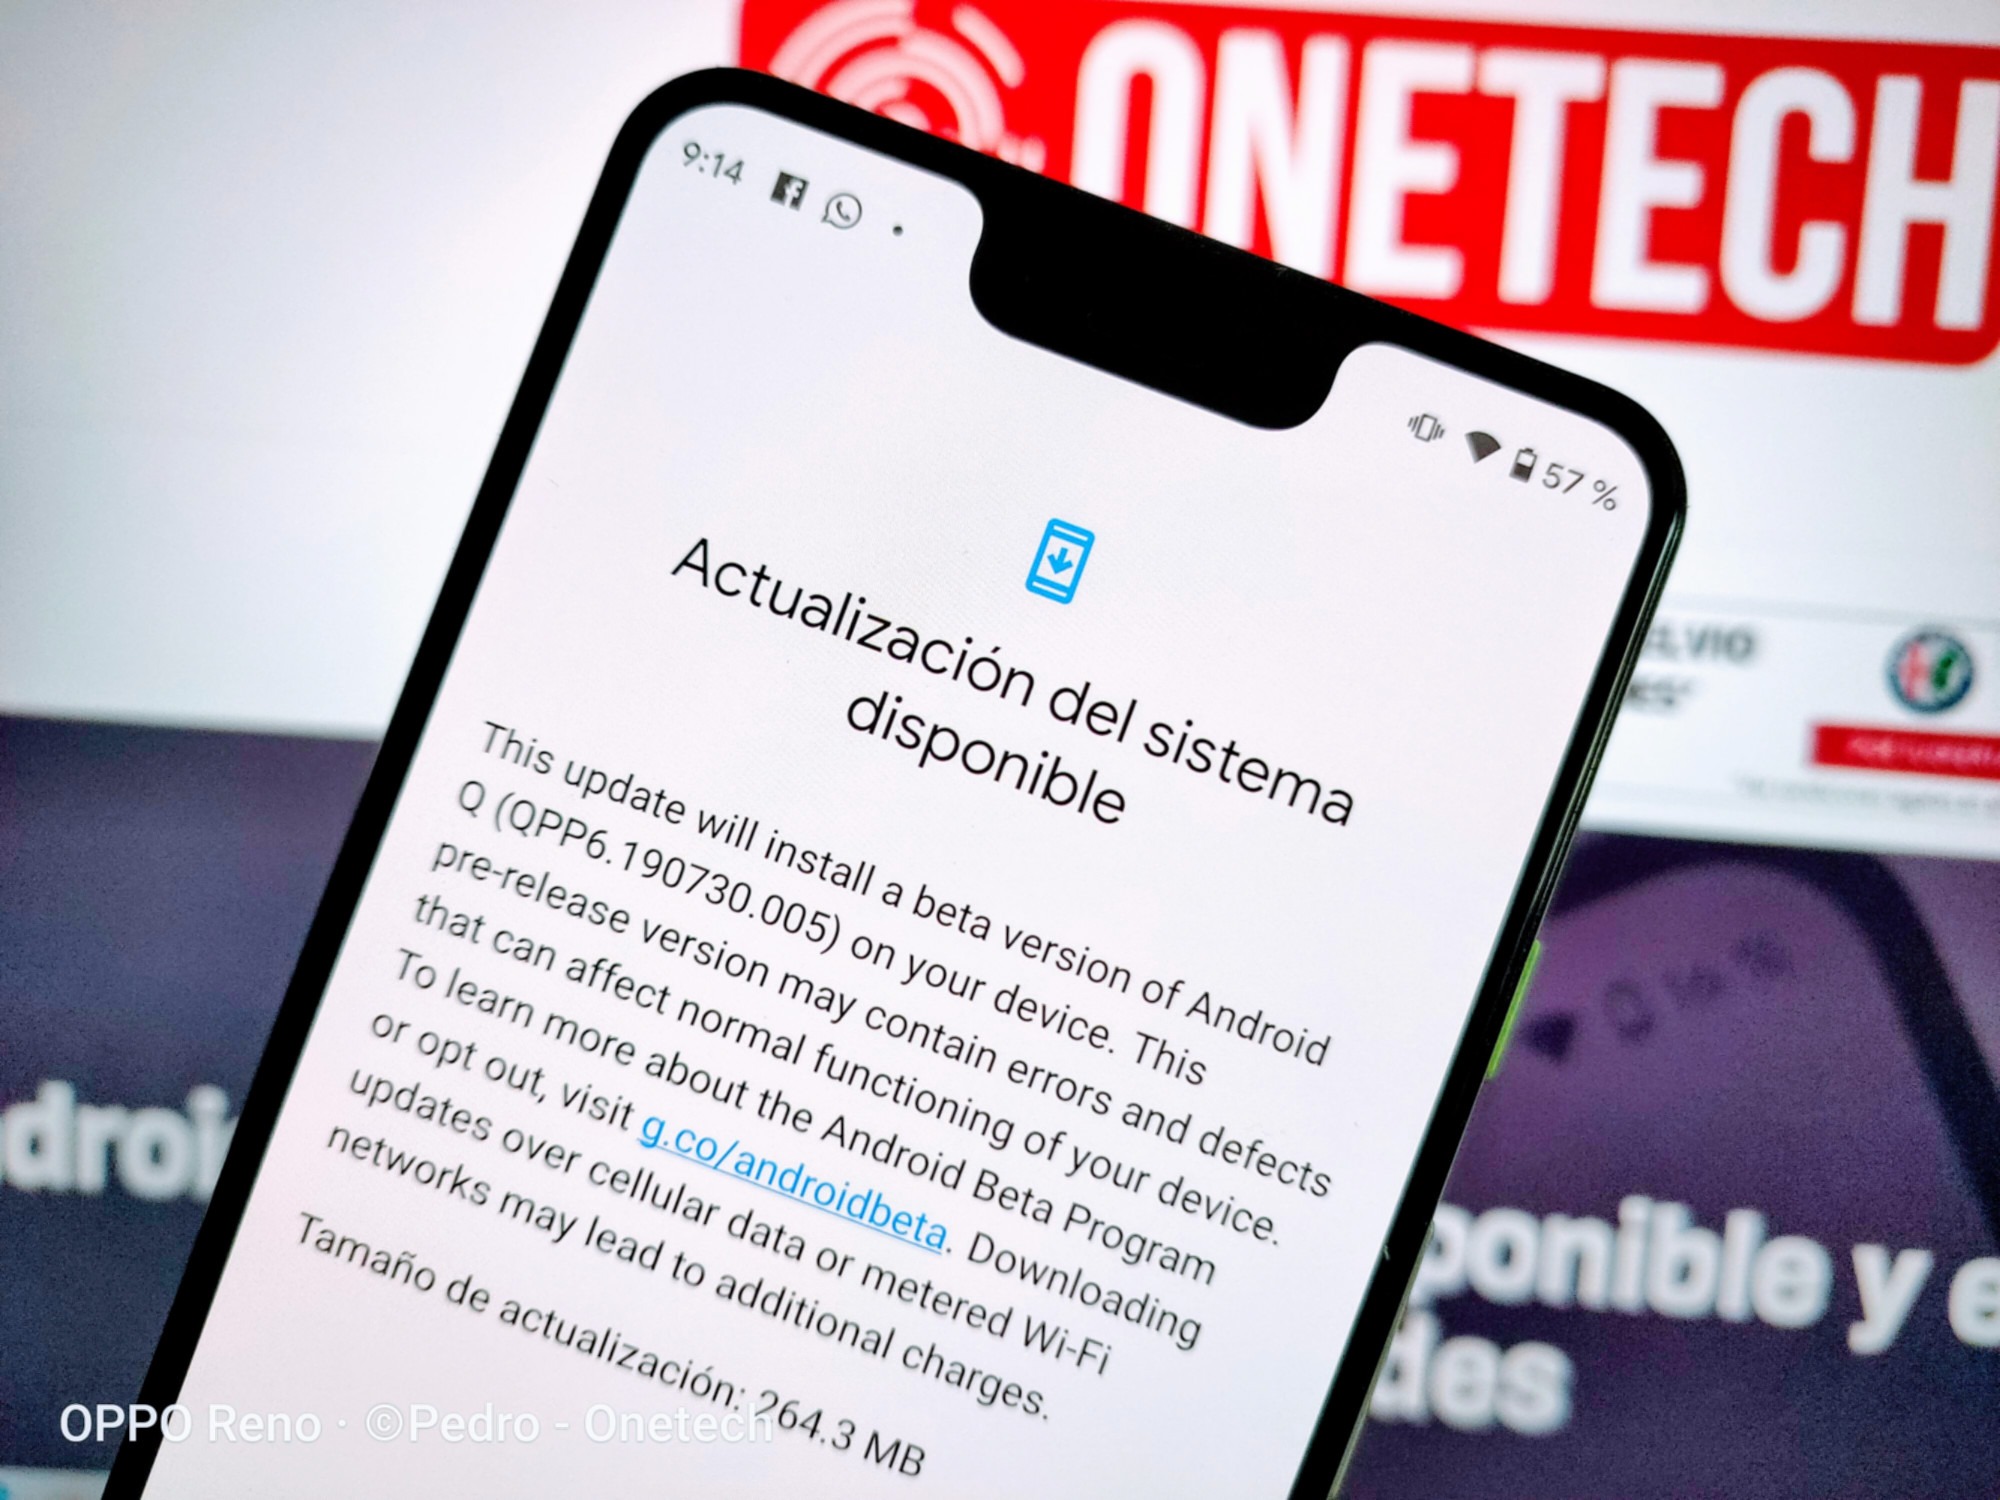 Onetech - Android Q